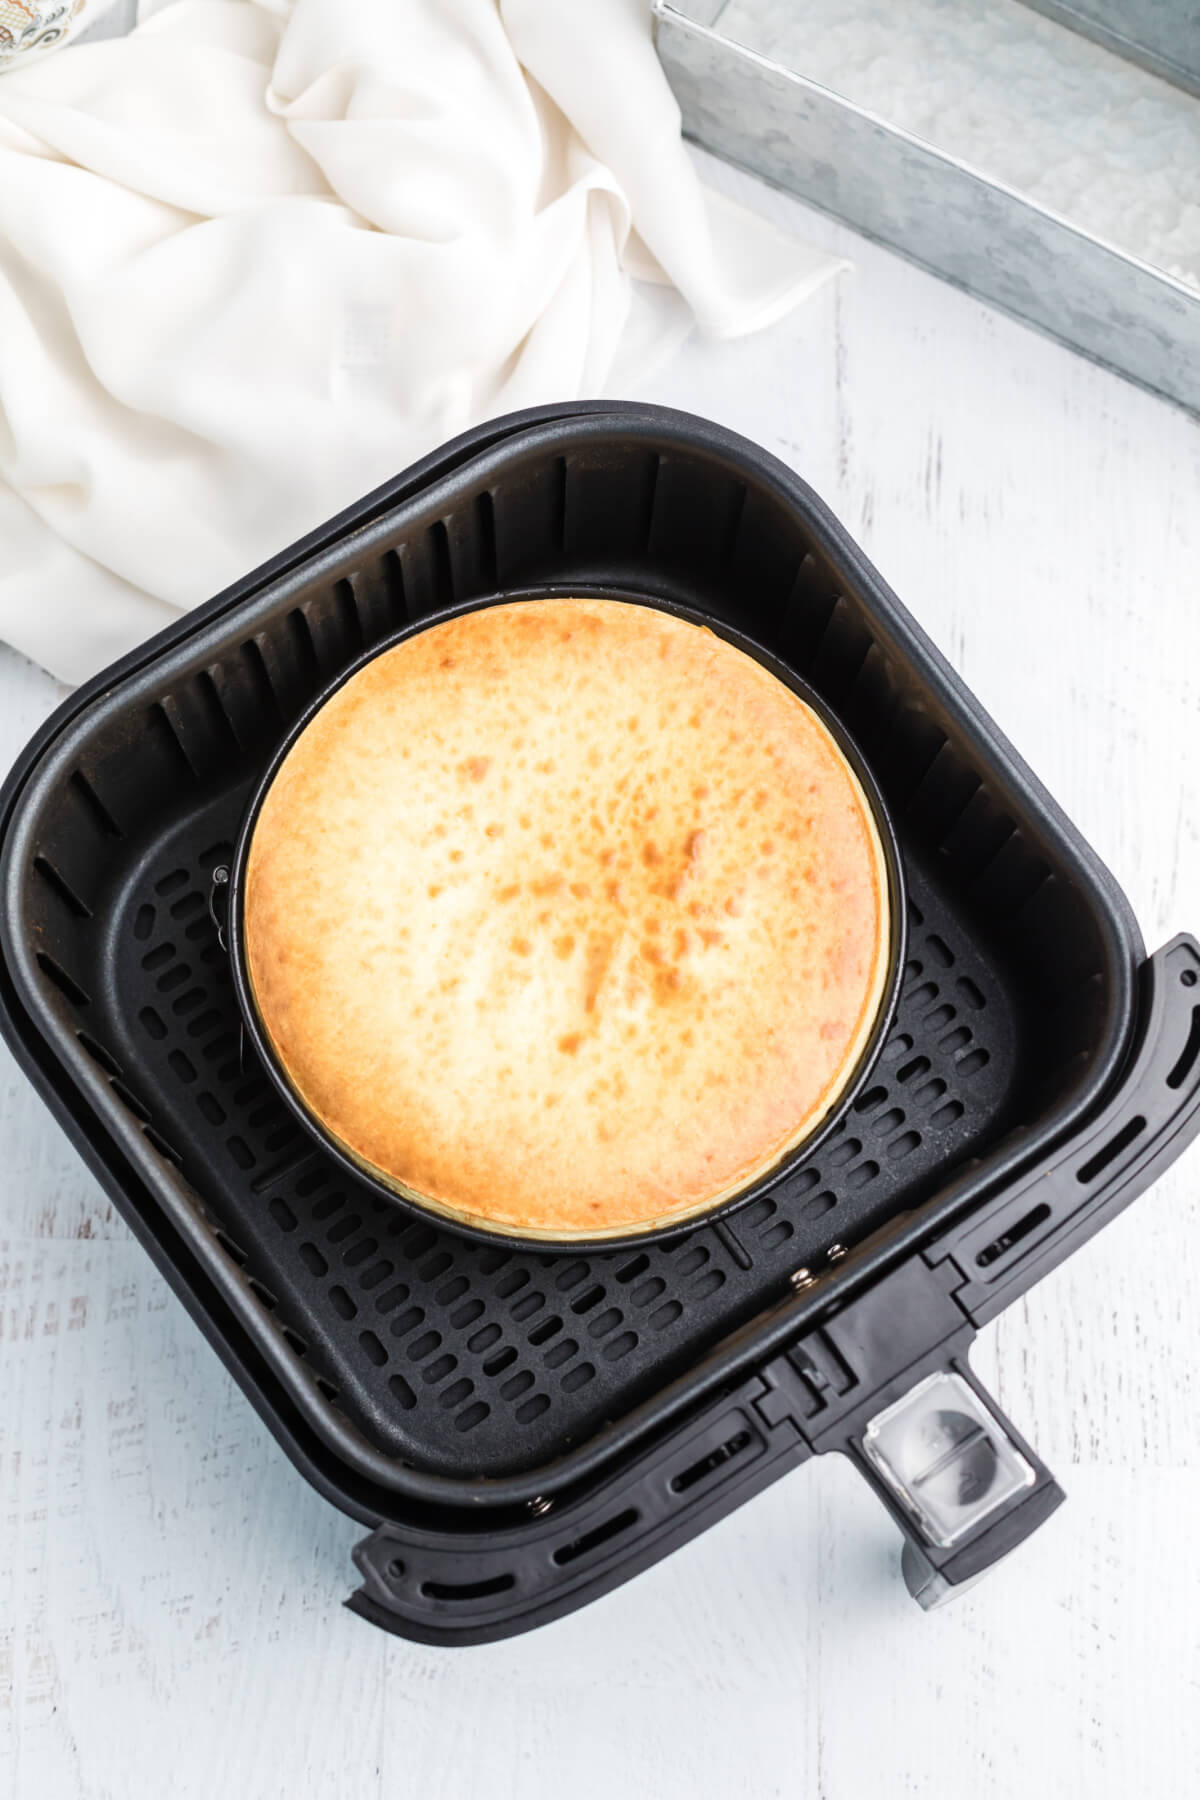 Fully cooked cheesecake in the basket of the air fryer, ready to be removed and chilled before serving. 